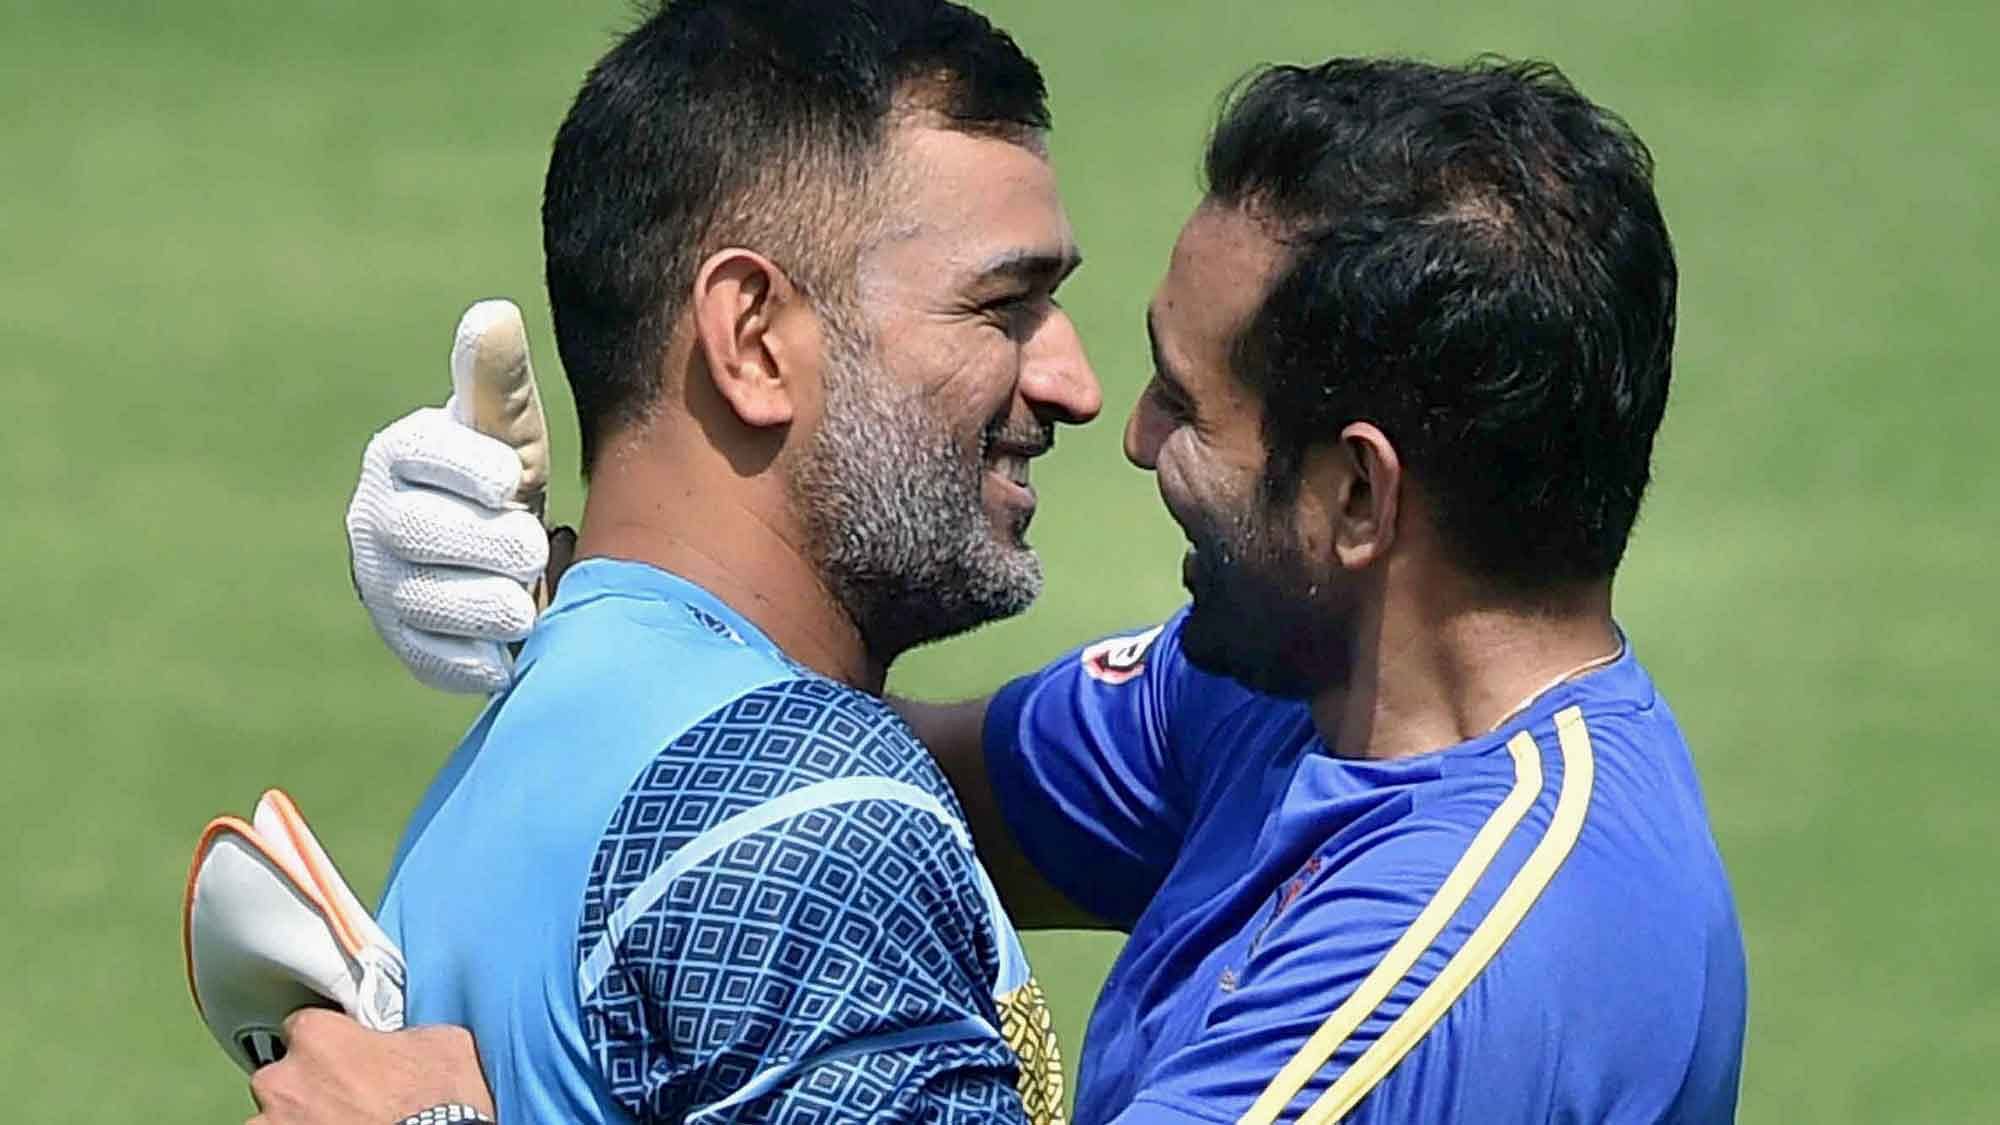 MS Dhoni met Robin Uthappa at a training session at Eden Gardens. (Photo: PTI)